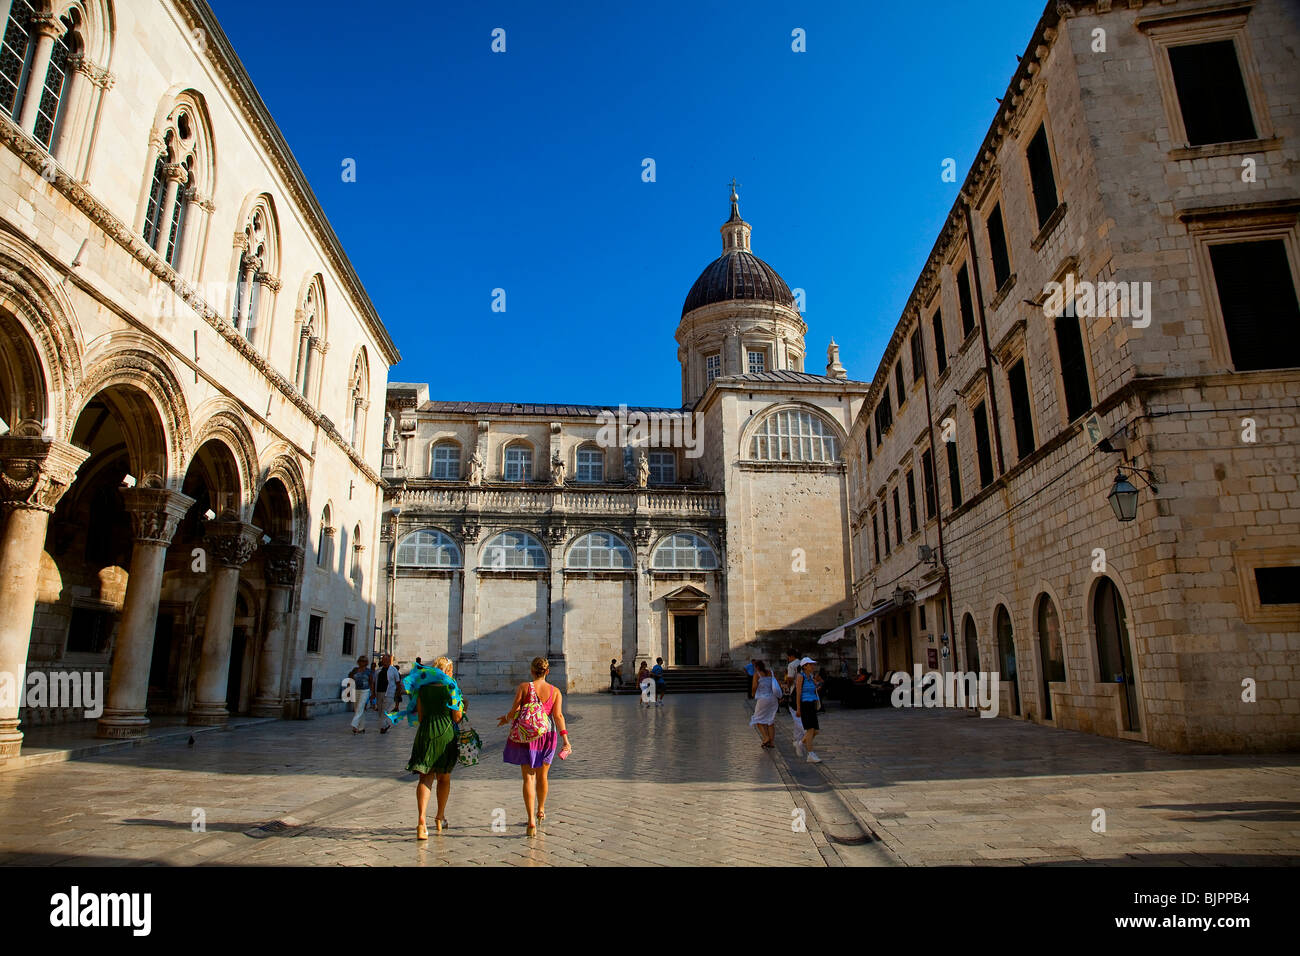 Rector's palace and Cathedral, Dubrovnik, Croatia Stock Photo